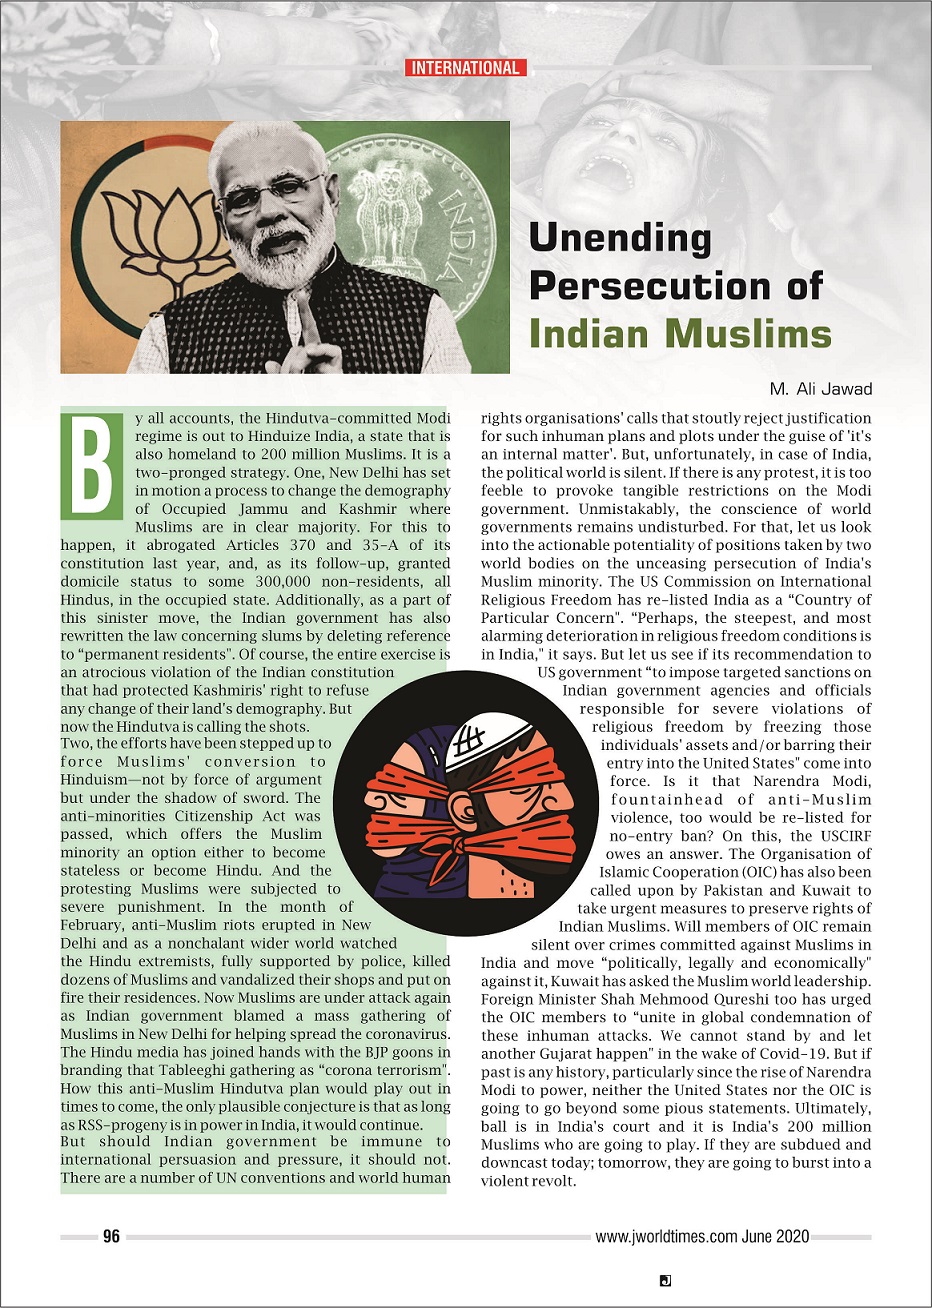 Unending Persecution of Indian Muslims